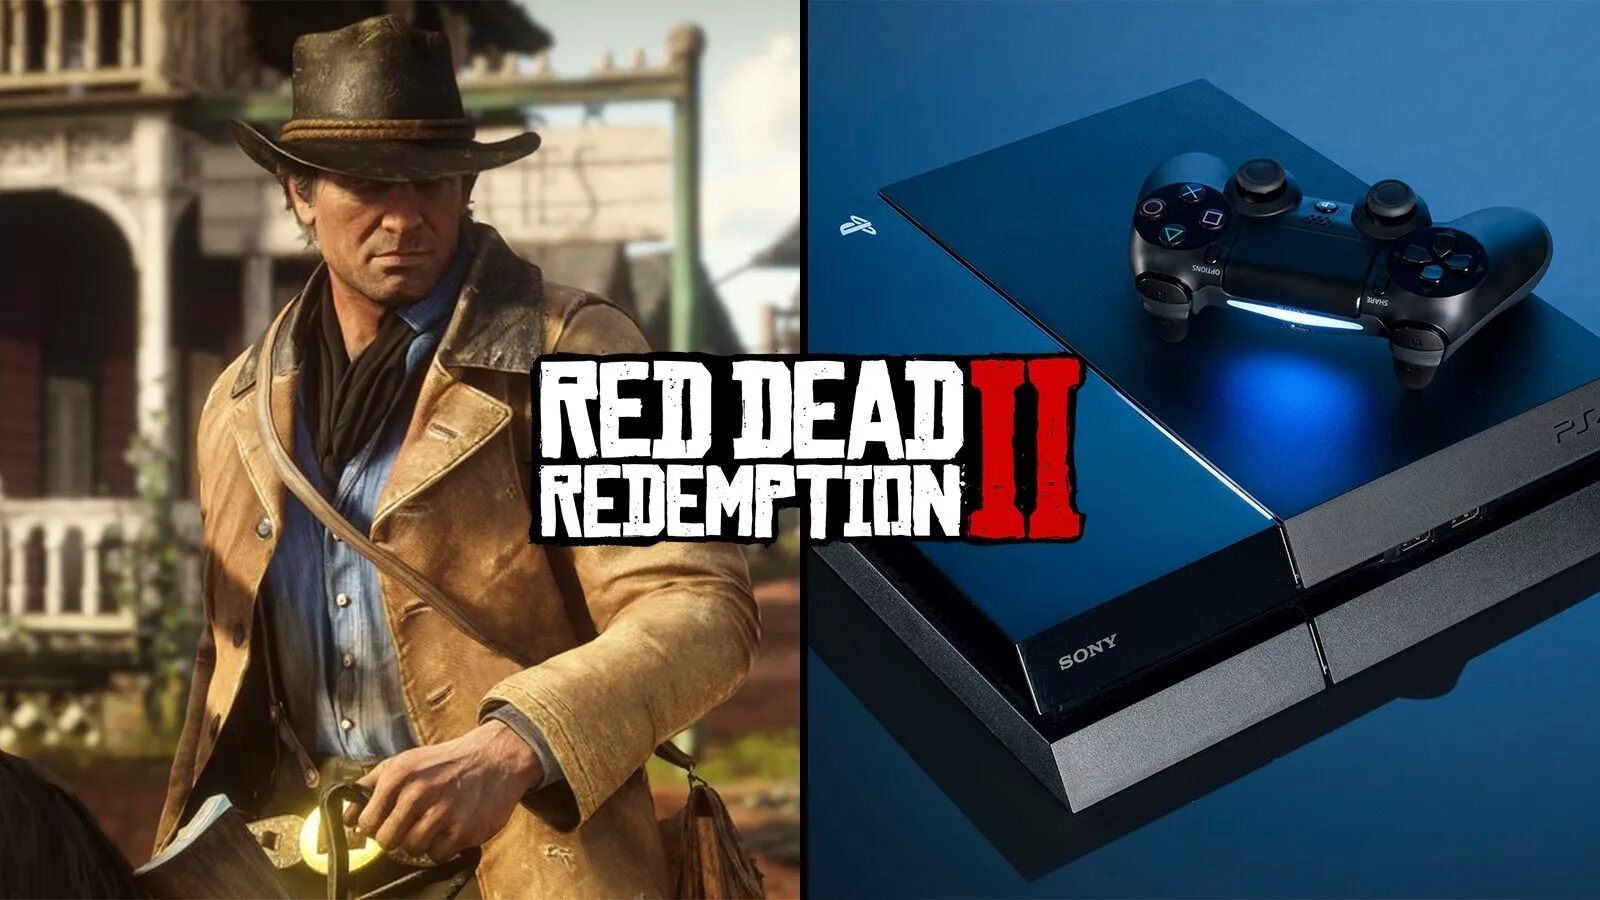 Red dead ps4 купить. Red Dead 2 ps4. Rdr 2 ps4 диск. Red Dead Redemption 2 диск пс4. Sony PLAYSTATION 4 Slim Red Dead Redemption 2.